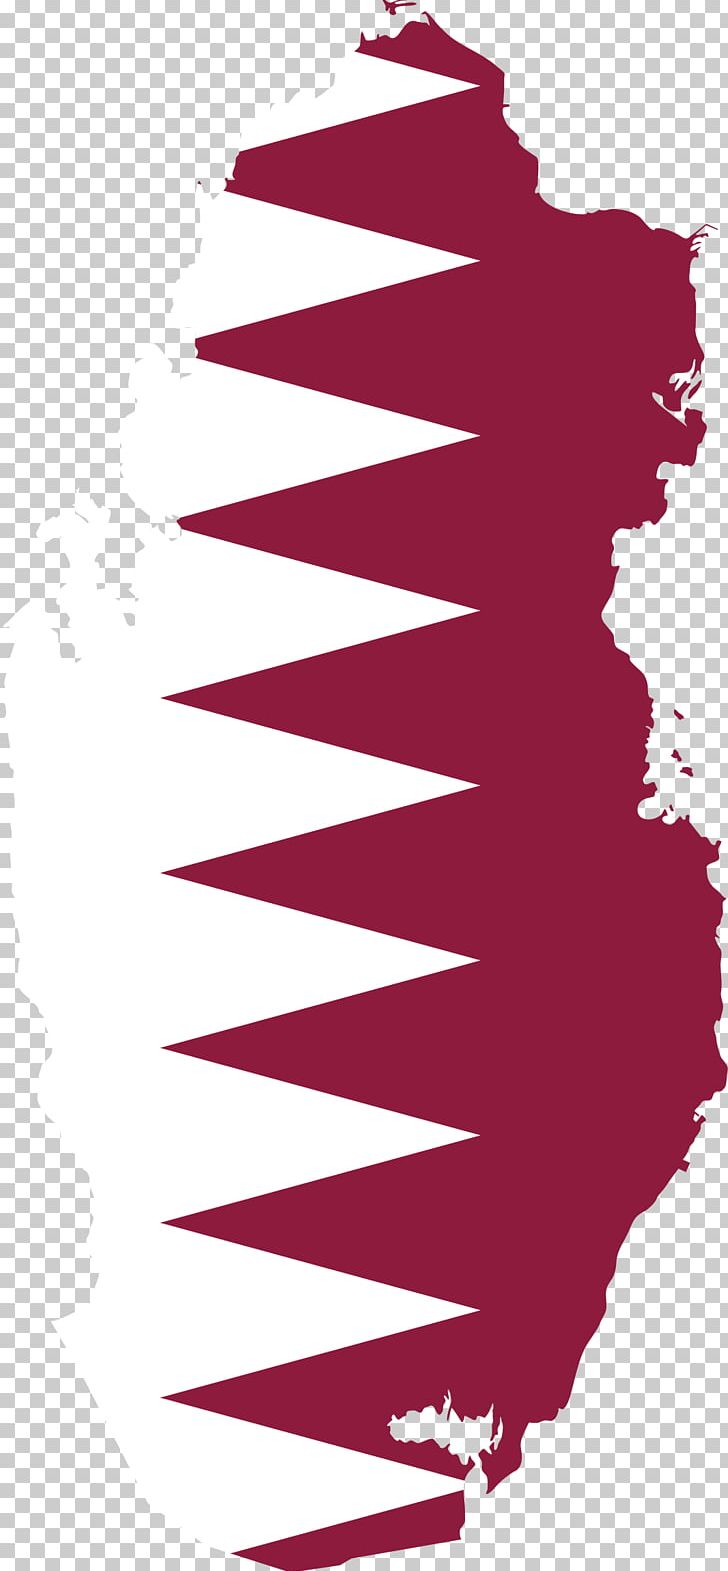 Qatar Blank Map Flag Map Collection PNG, Clipart, Angle, Blank, Blank Map, Border, Country Free PNG Download